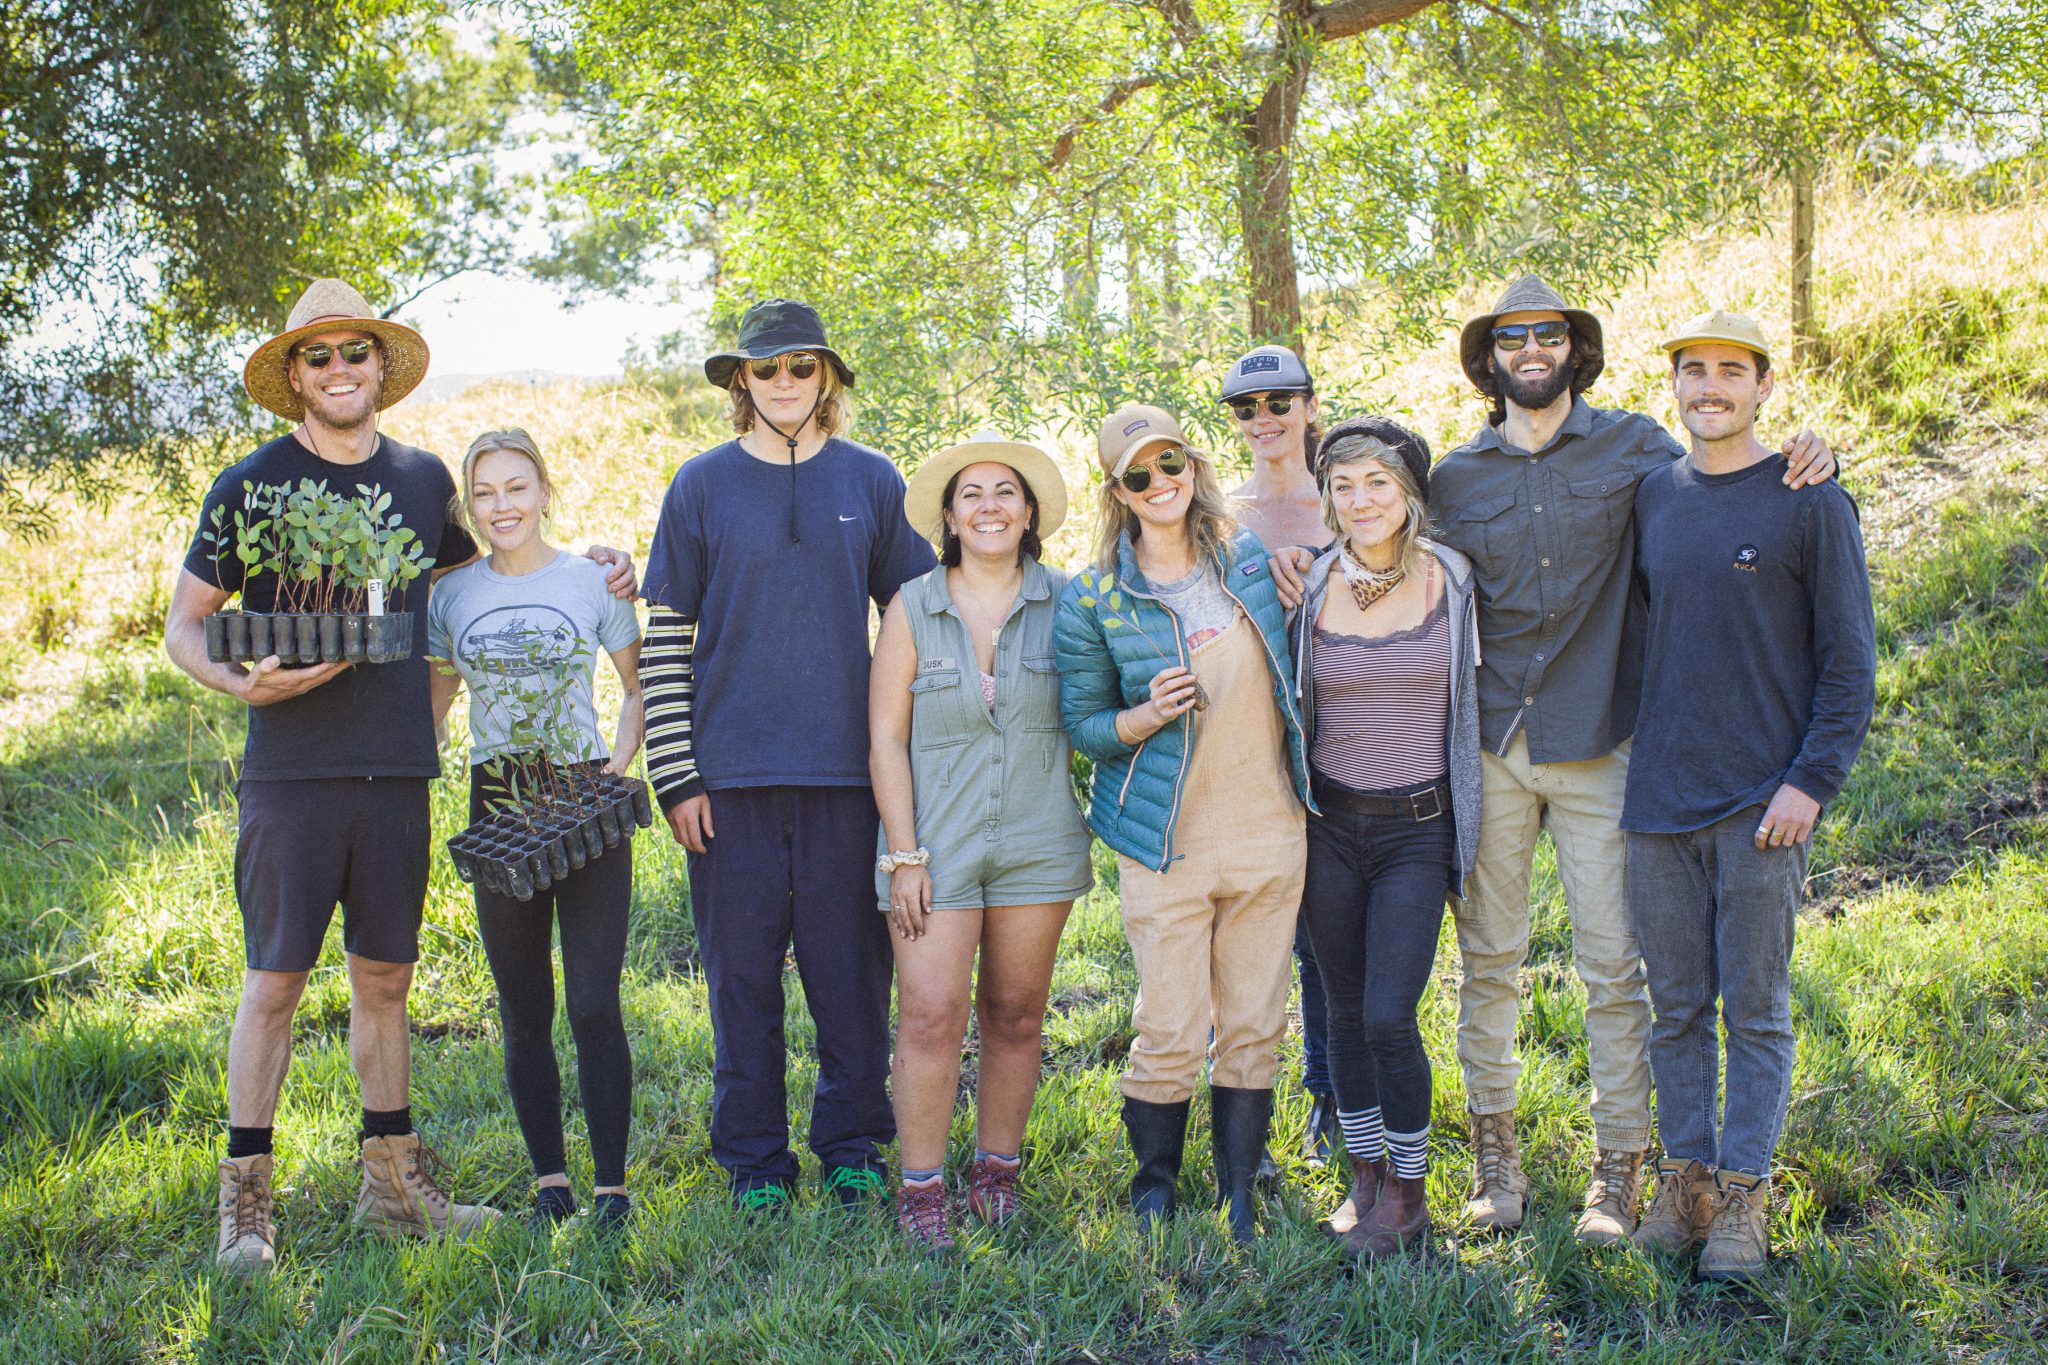 A group of people standing together and smiling on a koala tree planting day